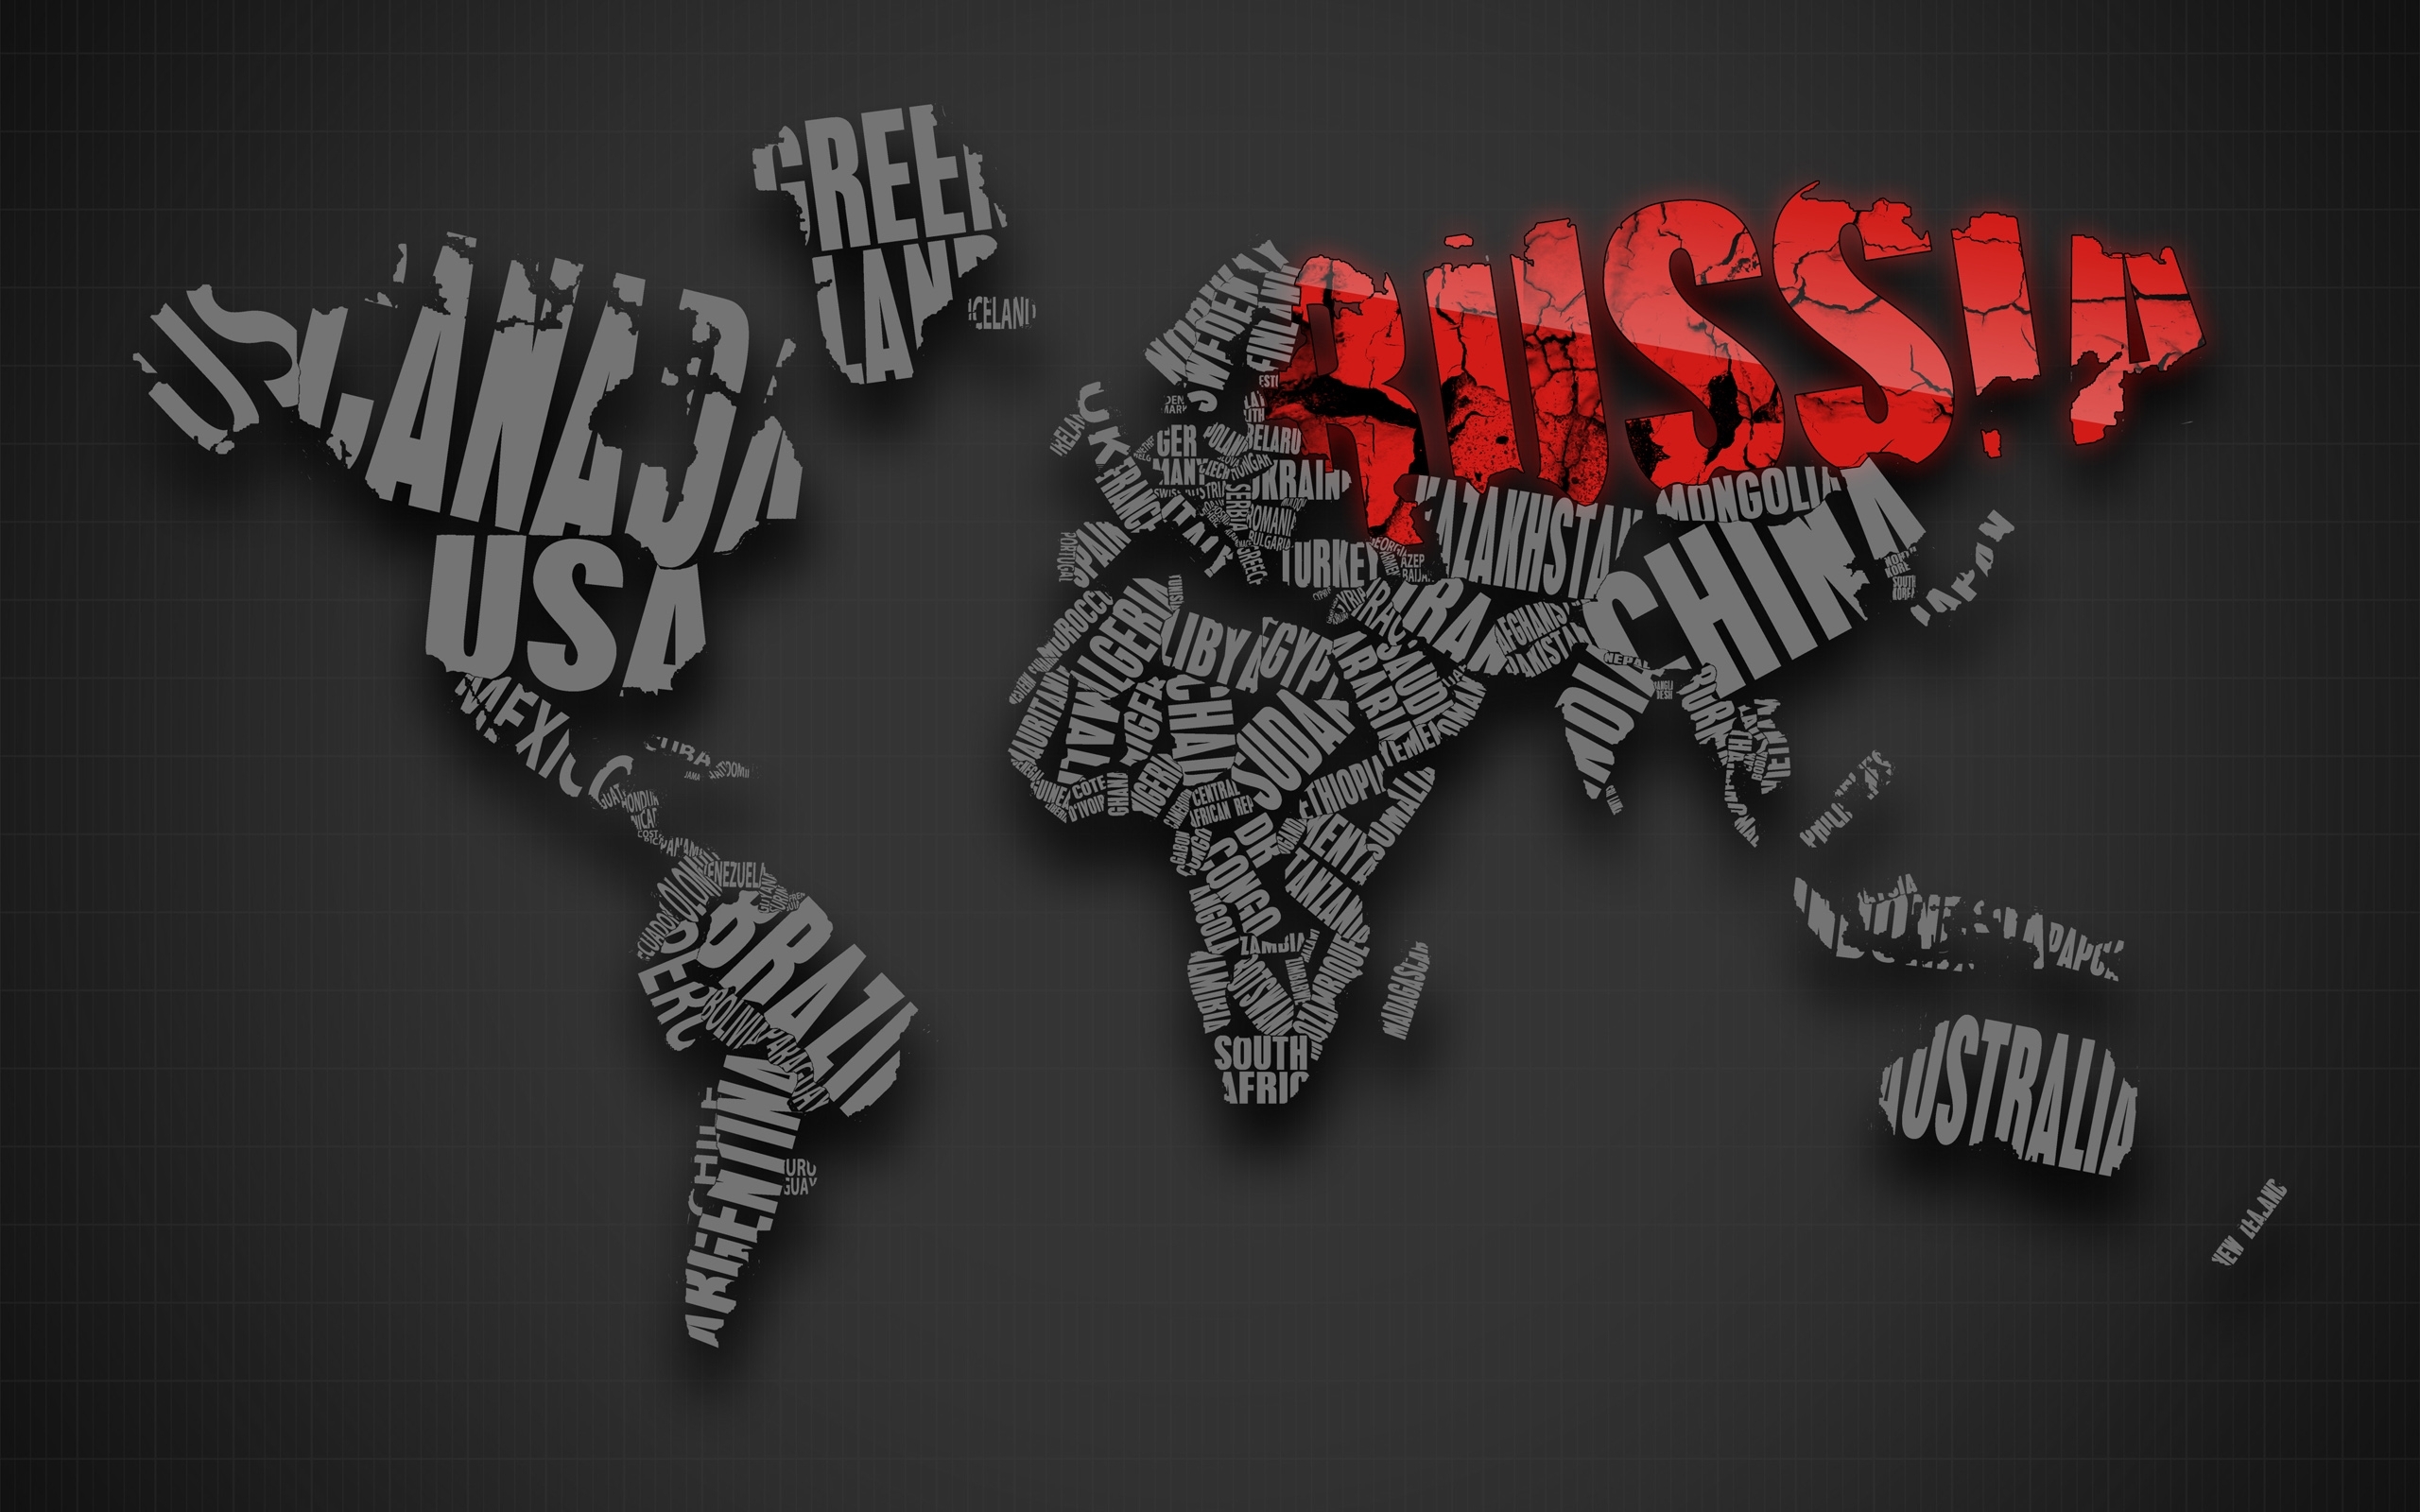 Russia On The Map Mac Wallpaper Download | AllMacWallpaper